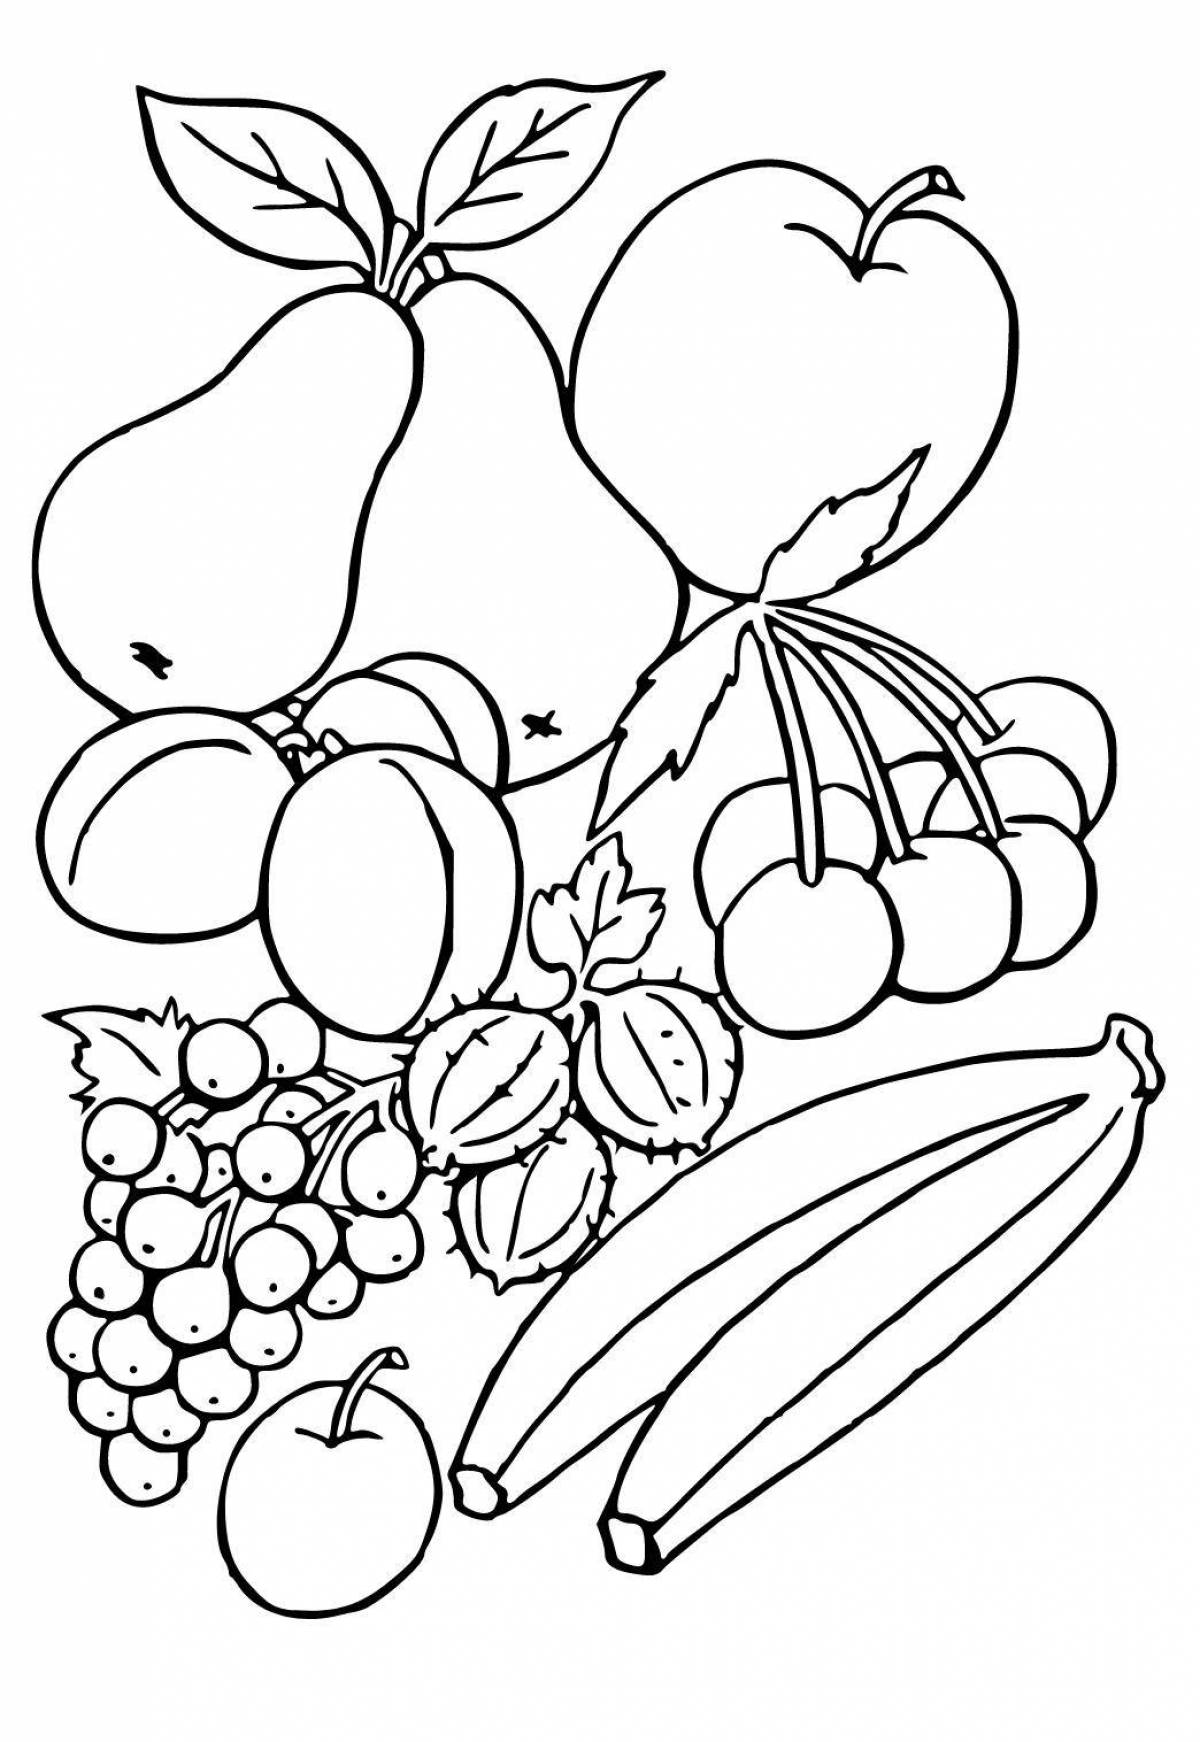 Playful berries and fruits coloring page for kids